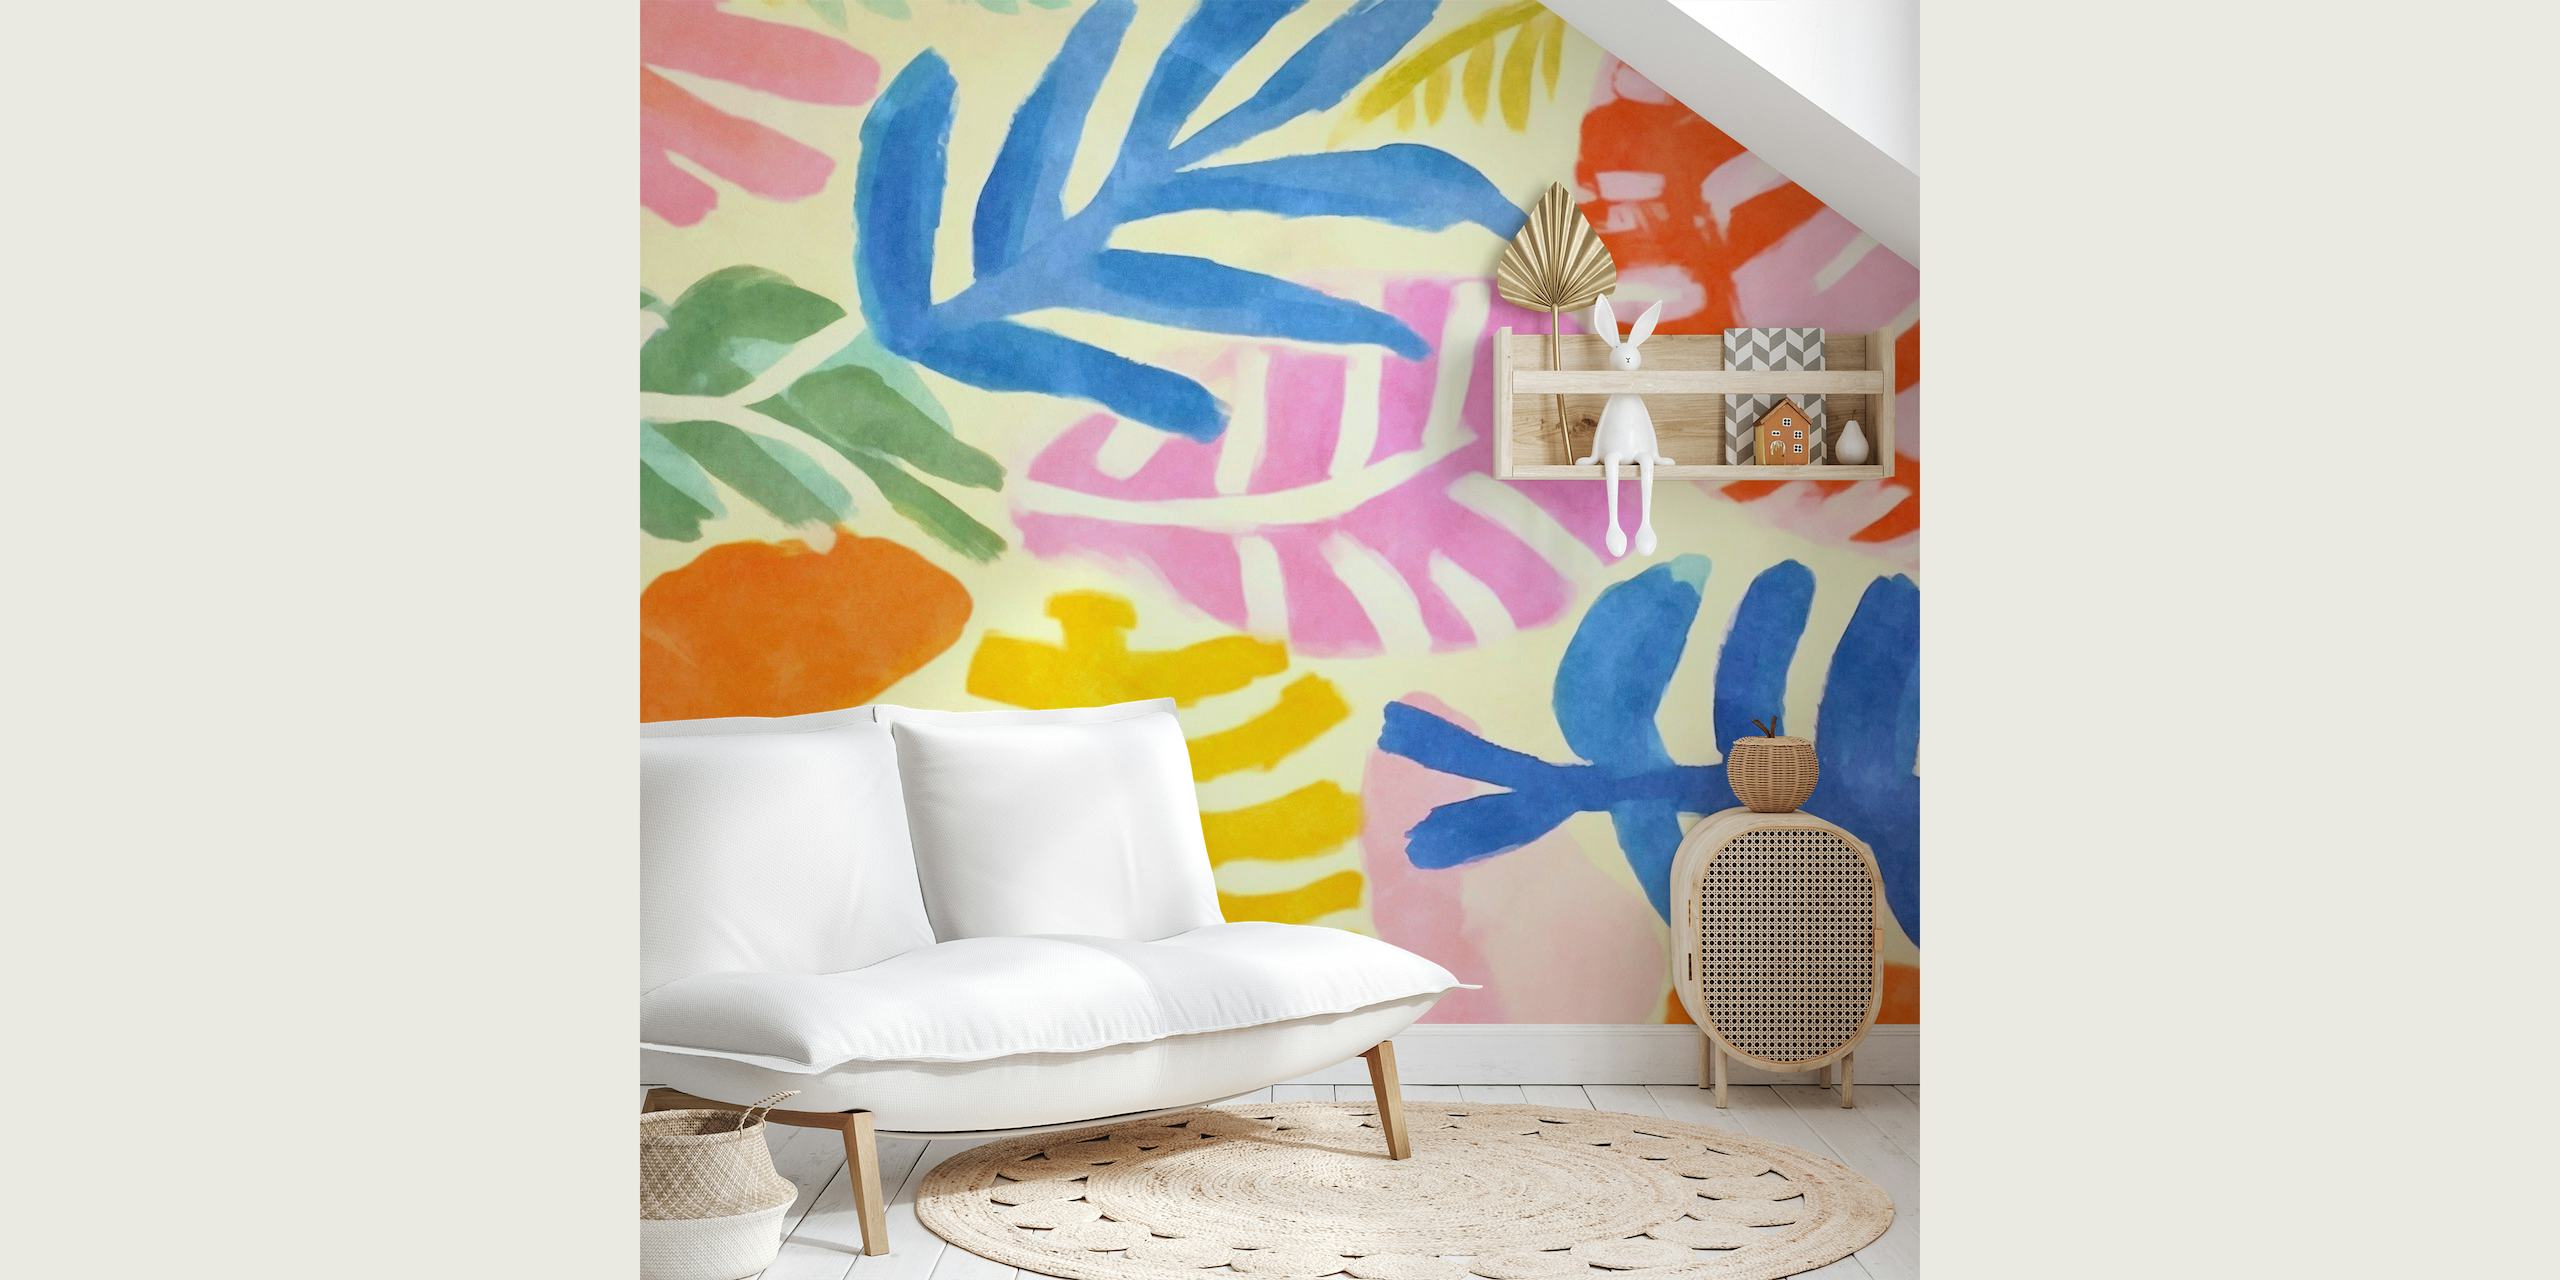 Colorful abstract floral wall mural in the style of Henri Matisse, with playful cut-out designs